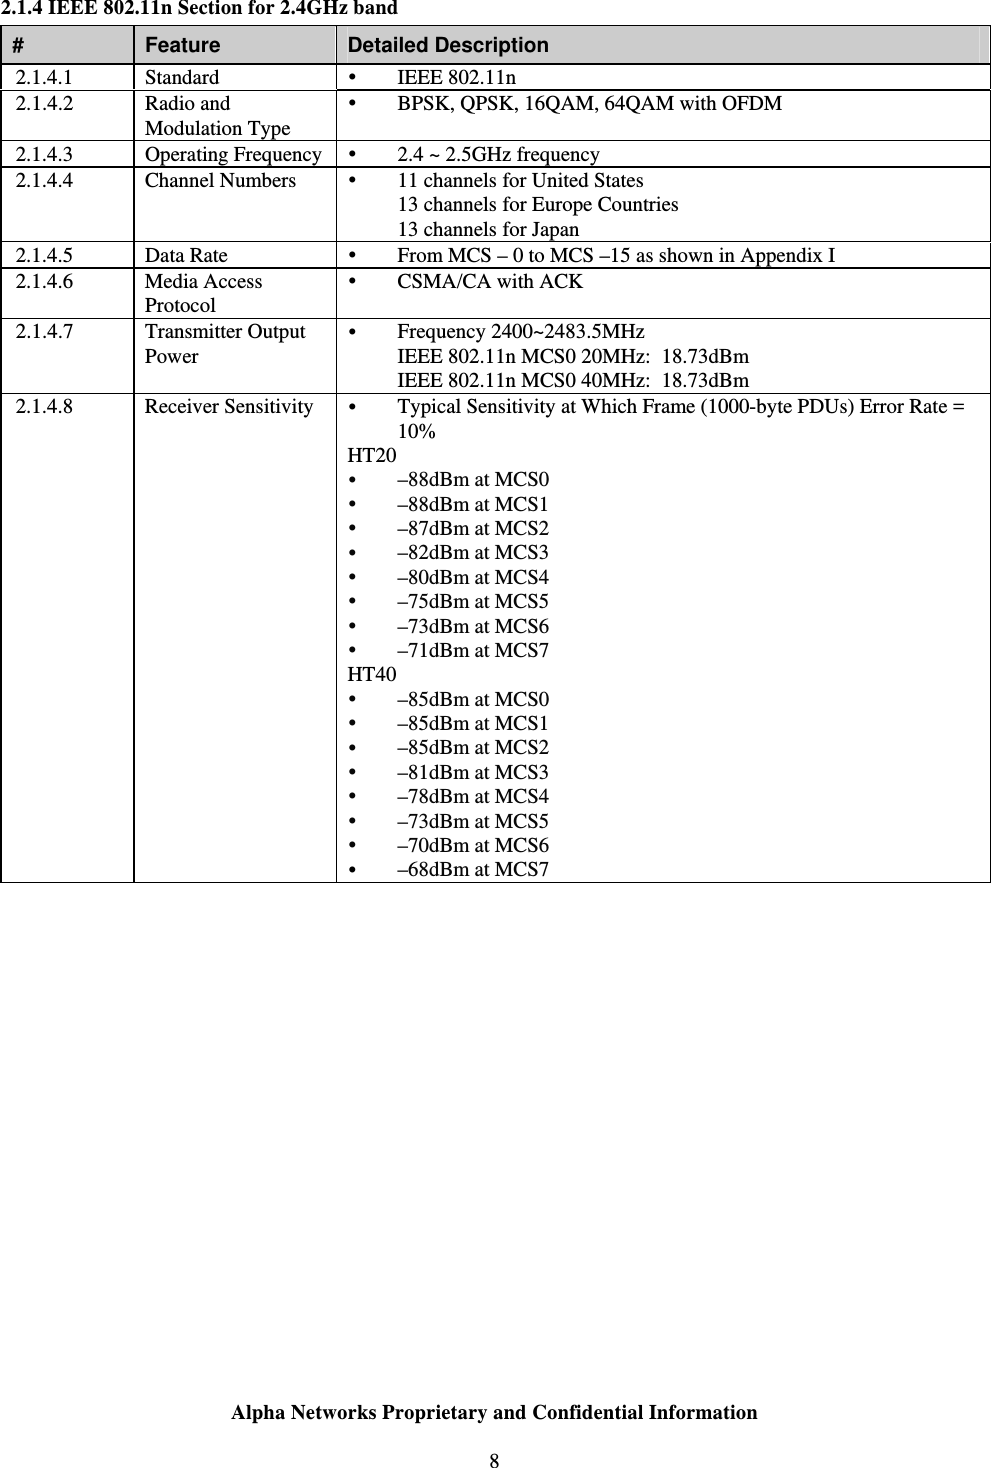  Alpha Networks Proprietary and Confidential Information  8  2.1.4 IEEE 802.11n Section for 2.4GHz band  #  Feature  Detailed Description 2.1.4.1 Standard   IEEE 802.11n 2.1.4.2 Radio and Modulation Type  BPSK, QPSK, 16QAM, 64QAM with OFDM 2.1.4.3 Operating Frequency  2.4 ~ 2.5GHz frequency 2.1.4.4  Channel Numbers    11 channels for United States 13 channels for Europe Countries 13 channels for Japan 2.1.4.5 Data Rate   From MCS – 0 to MCS –15 as shown in Appendix I 2.1.4.6 Media Access Protocol  CSMA/CA with ACK 2.1.4.7 Transmitter Output Power  Frequency 2400~2483.5MHz IEEE 802.11n MCS0 20MHz:  18.73dBm IEEE 802.11n MCS0 40MHz:  18.73dBm 2.1.4.8 Receiver Sensitivity  Typical Sensitivity at Which Frame (1000-byte PDUs) Error Rate = 10% HT20  –88dBm at MCS0  –88dBm at MCS1  –87dBm at MCS2  –82dBm at MCS3  –80dBm at MCS4  –75dBm at MCS5  –73dBm at MCS6  –71dBm at MCS7   HT40  –85dBm at MCS0  –85dBm at MCS1  –85dBm at MCS2  –81dBm at MCS3  –78dBm at MCS4  –73dBm at MCS5  –70dBm at MCS6  –68dBm at MCS7    